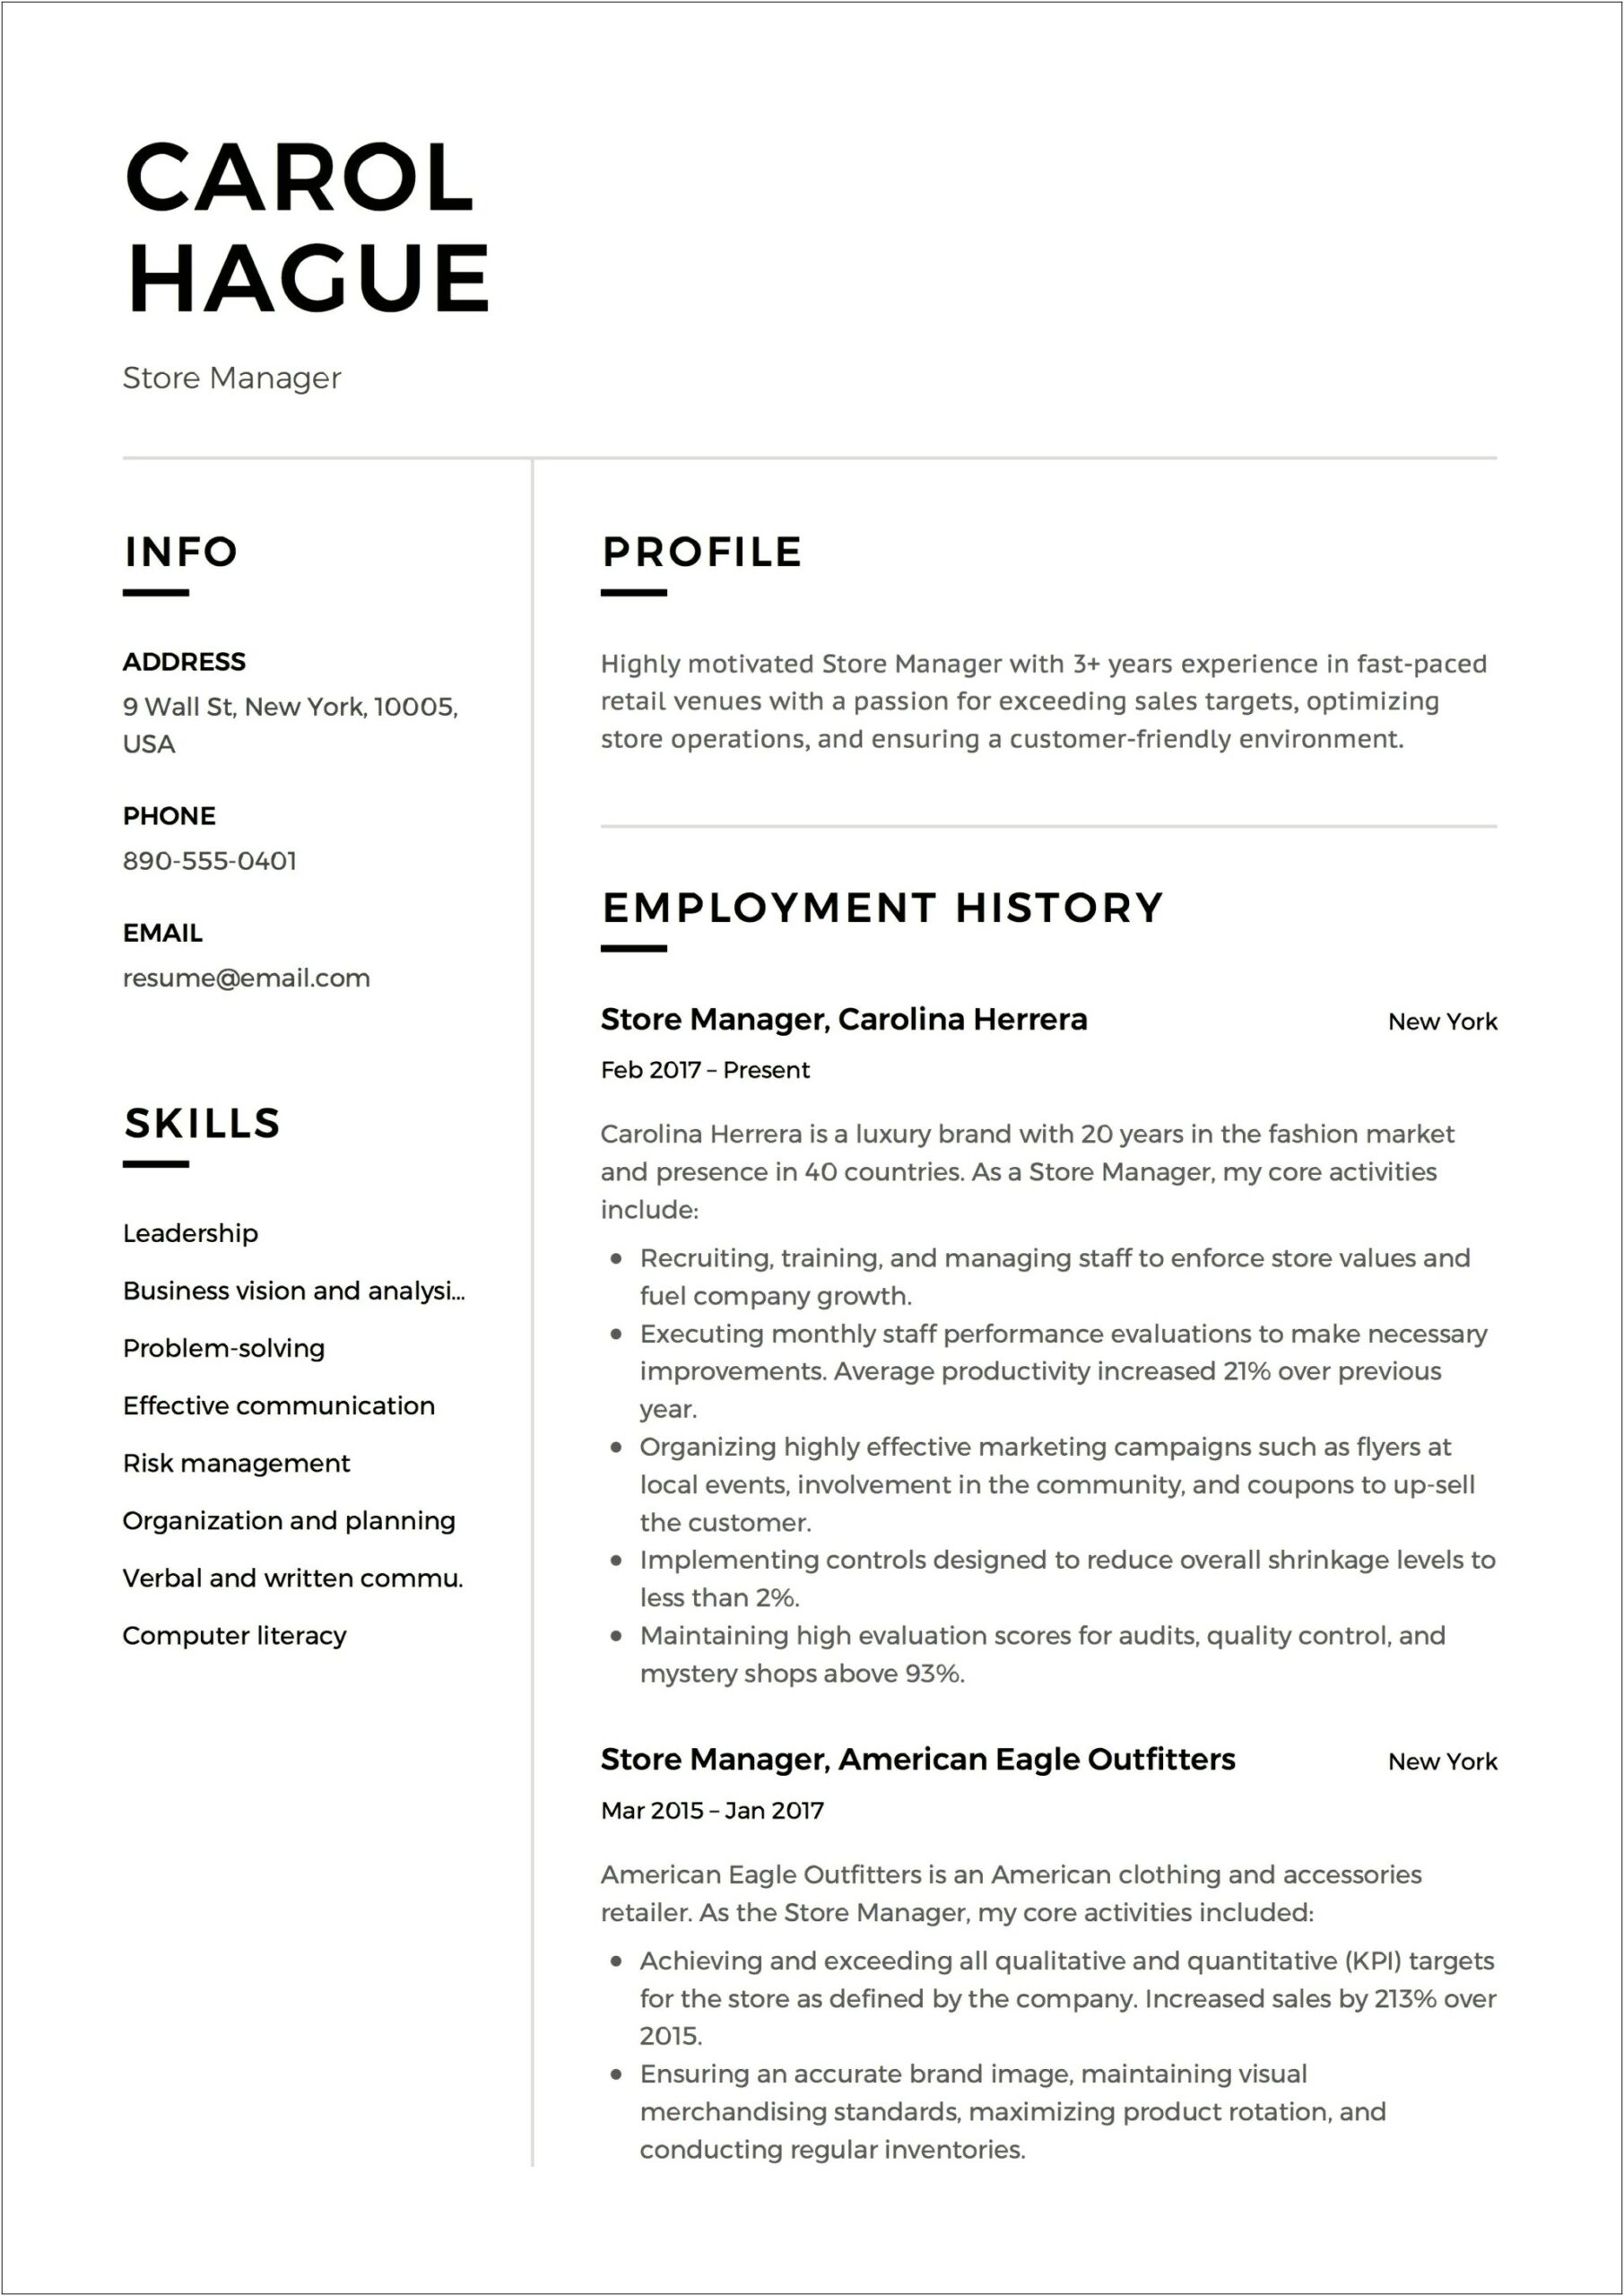 Sample Of A Retail District Manager Resume